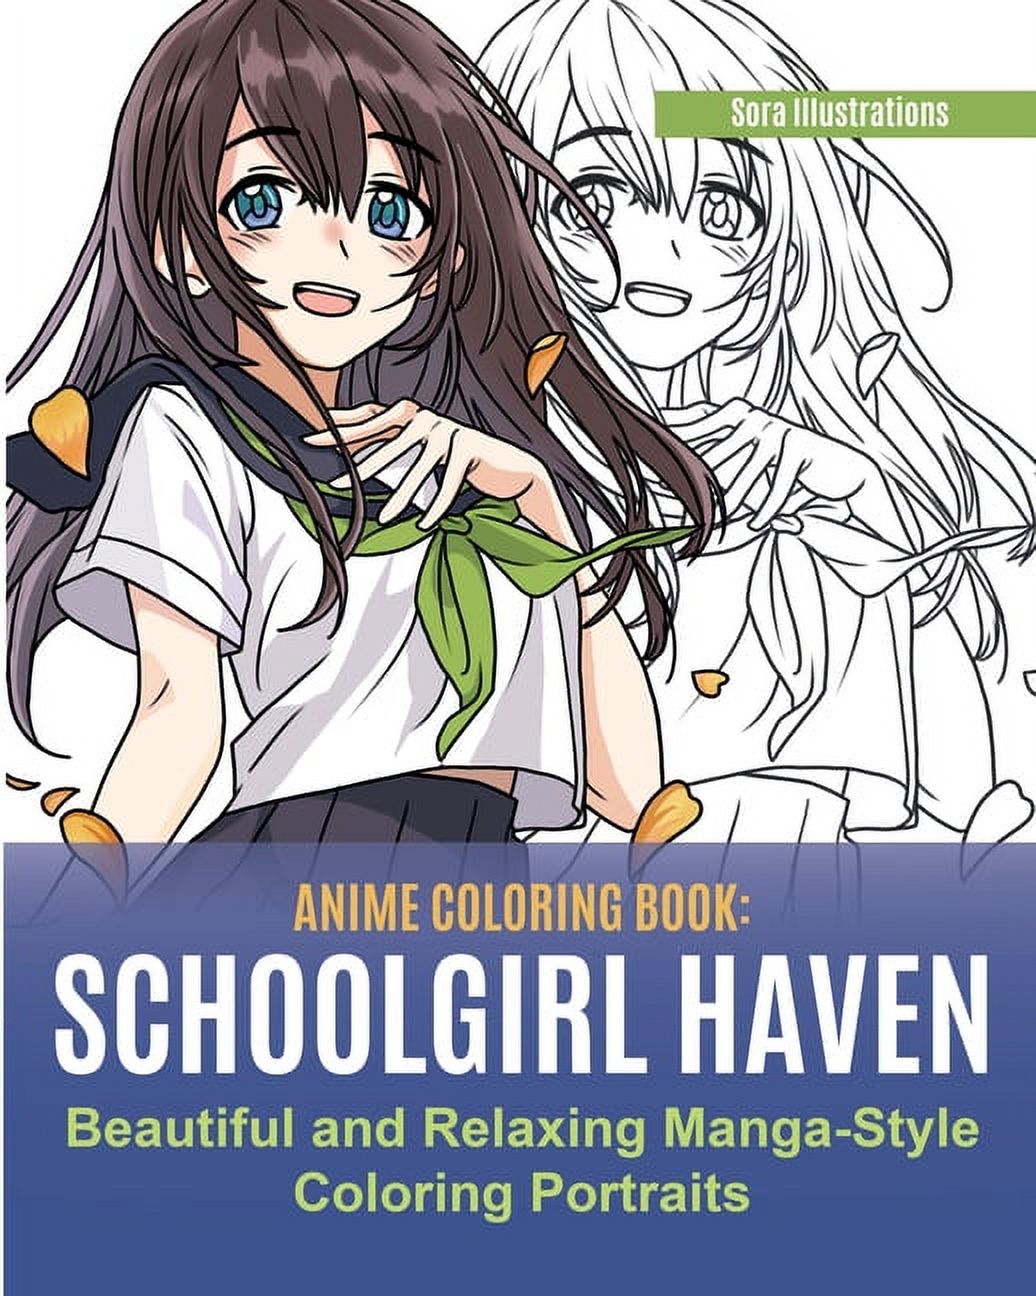 Anime Coloring Book: School Girl Haven. Beautiful and Relaxing Manga-Style Coloring Portraits [Book]